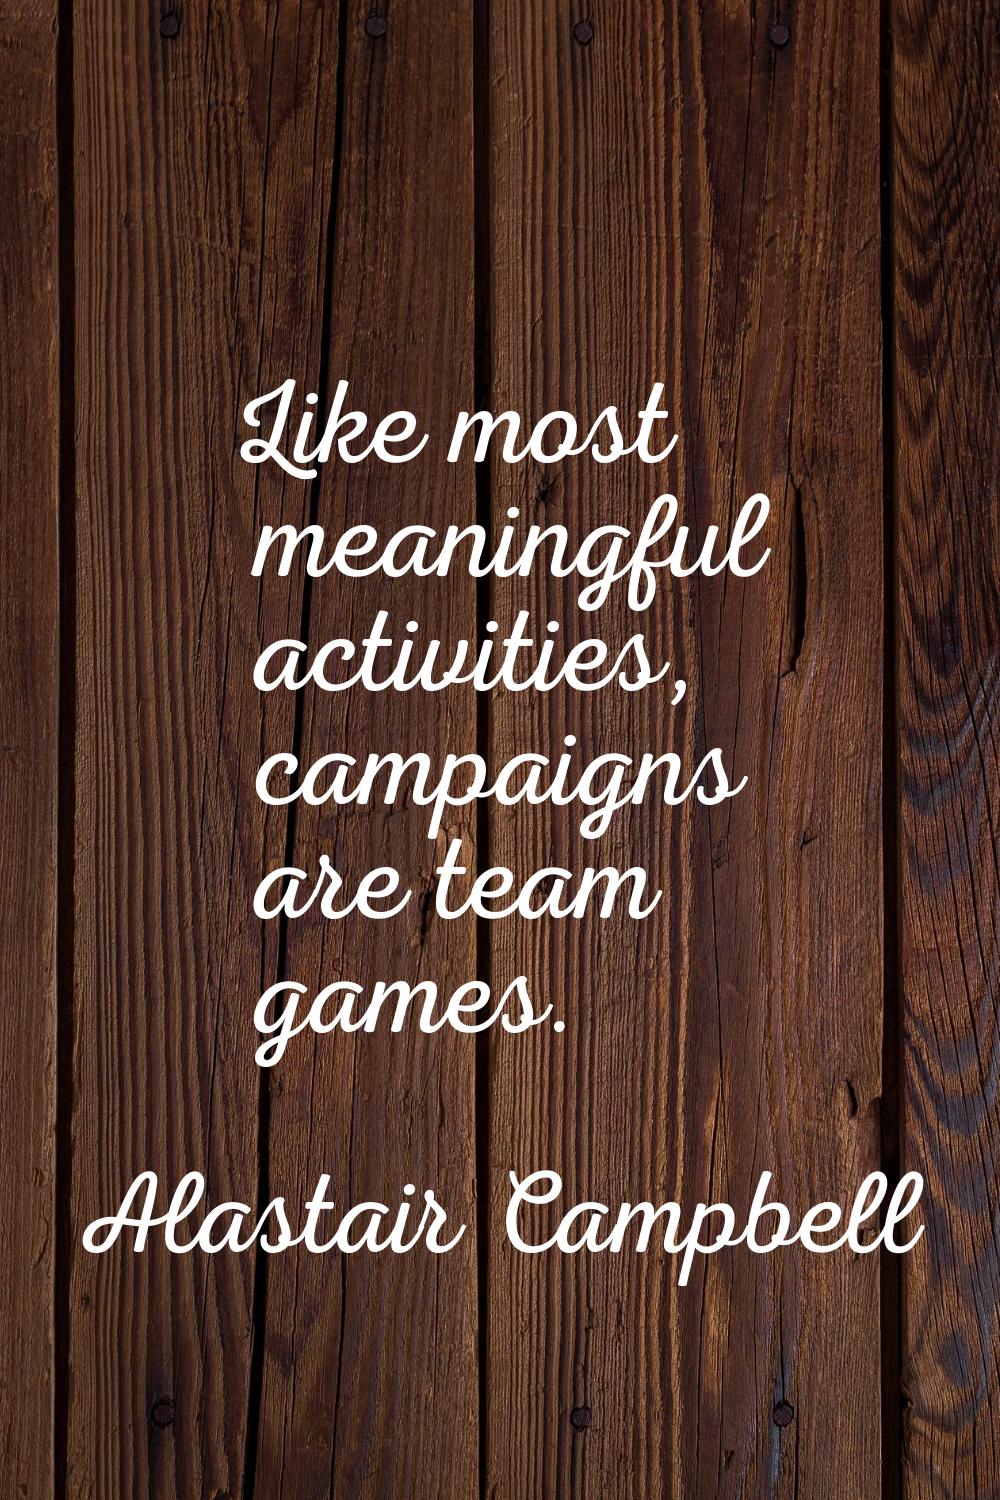 Like most meaningful activities, campaigns are team games.